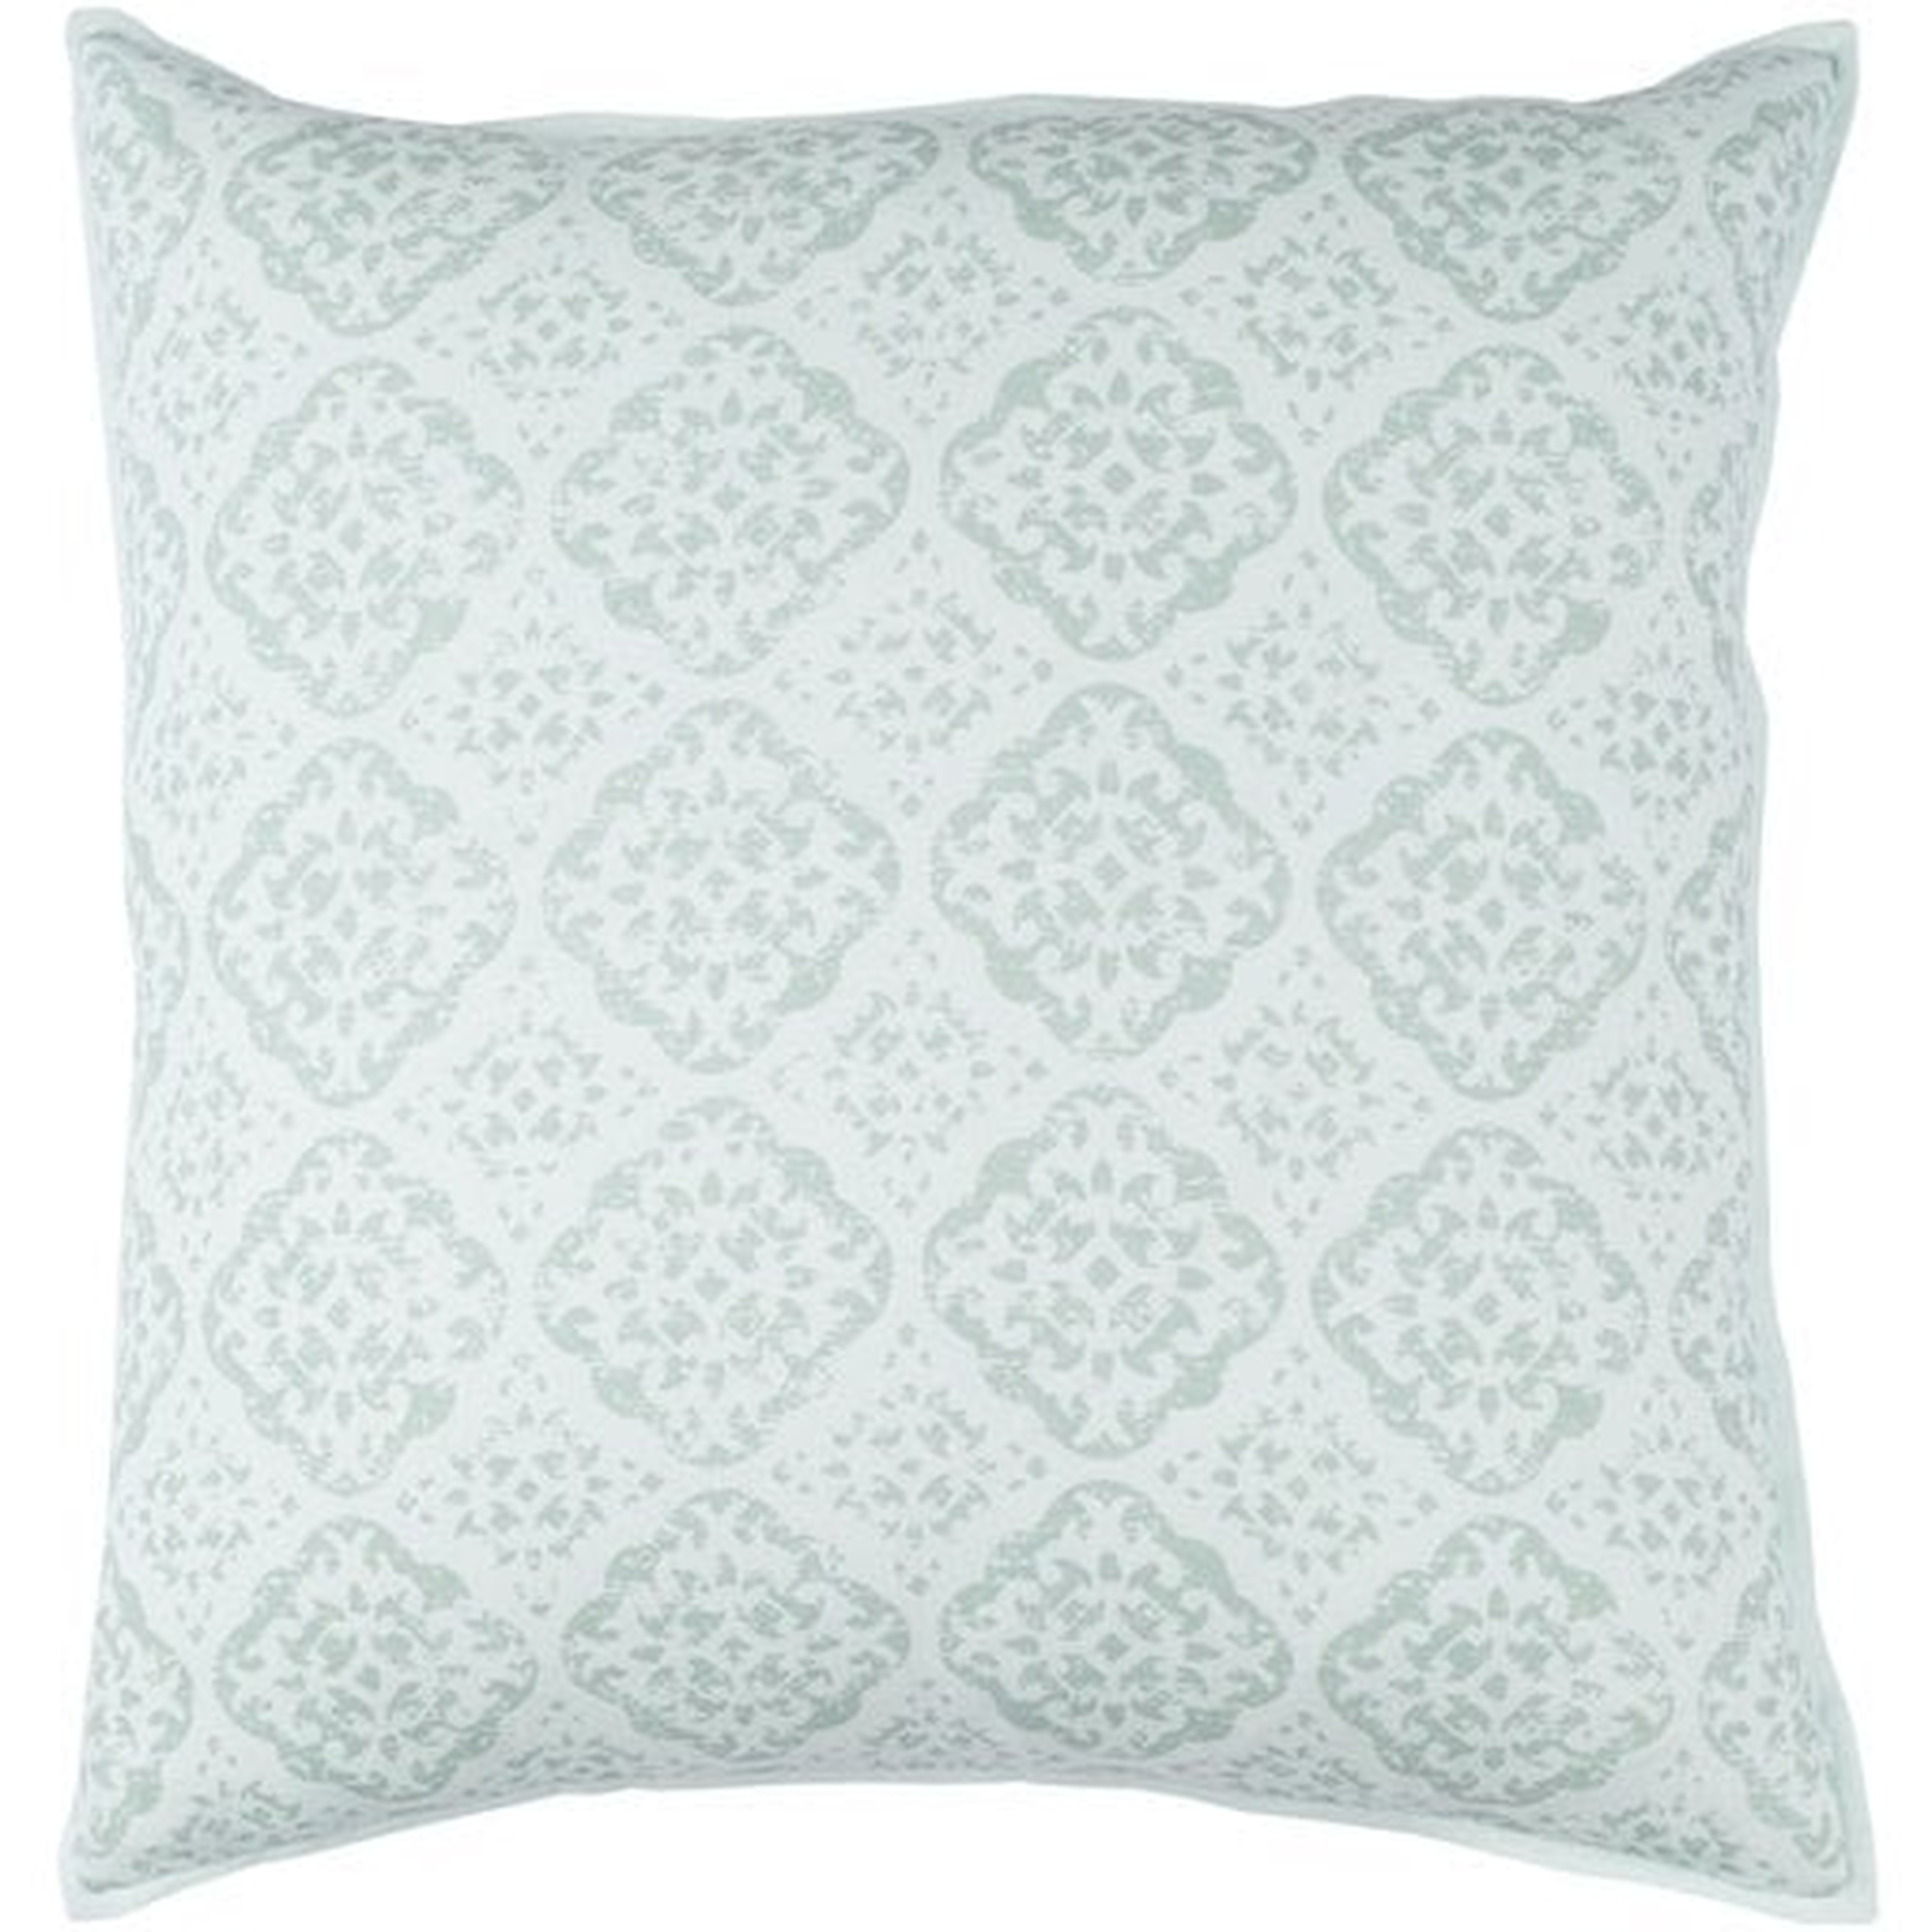 D'Orsay Throw Pillow, 18" x 18", with poly insert - Surya